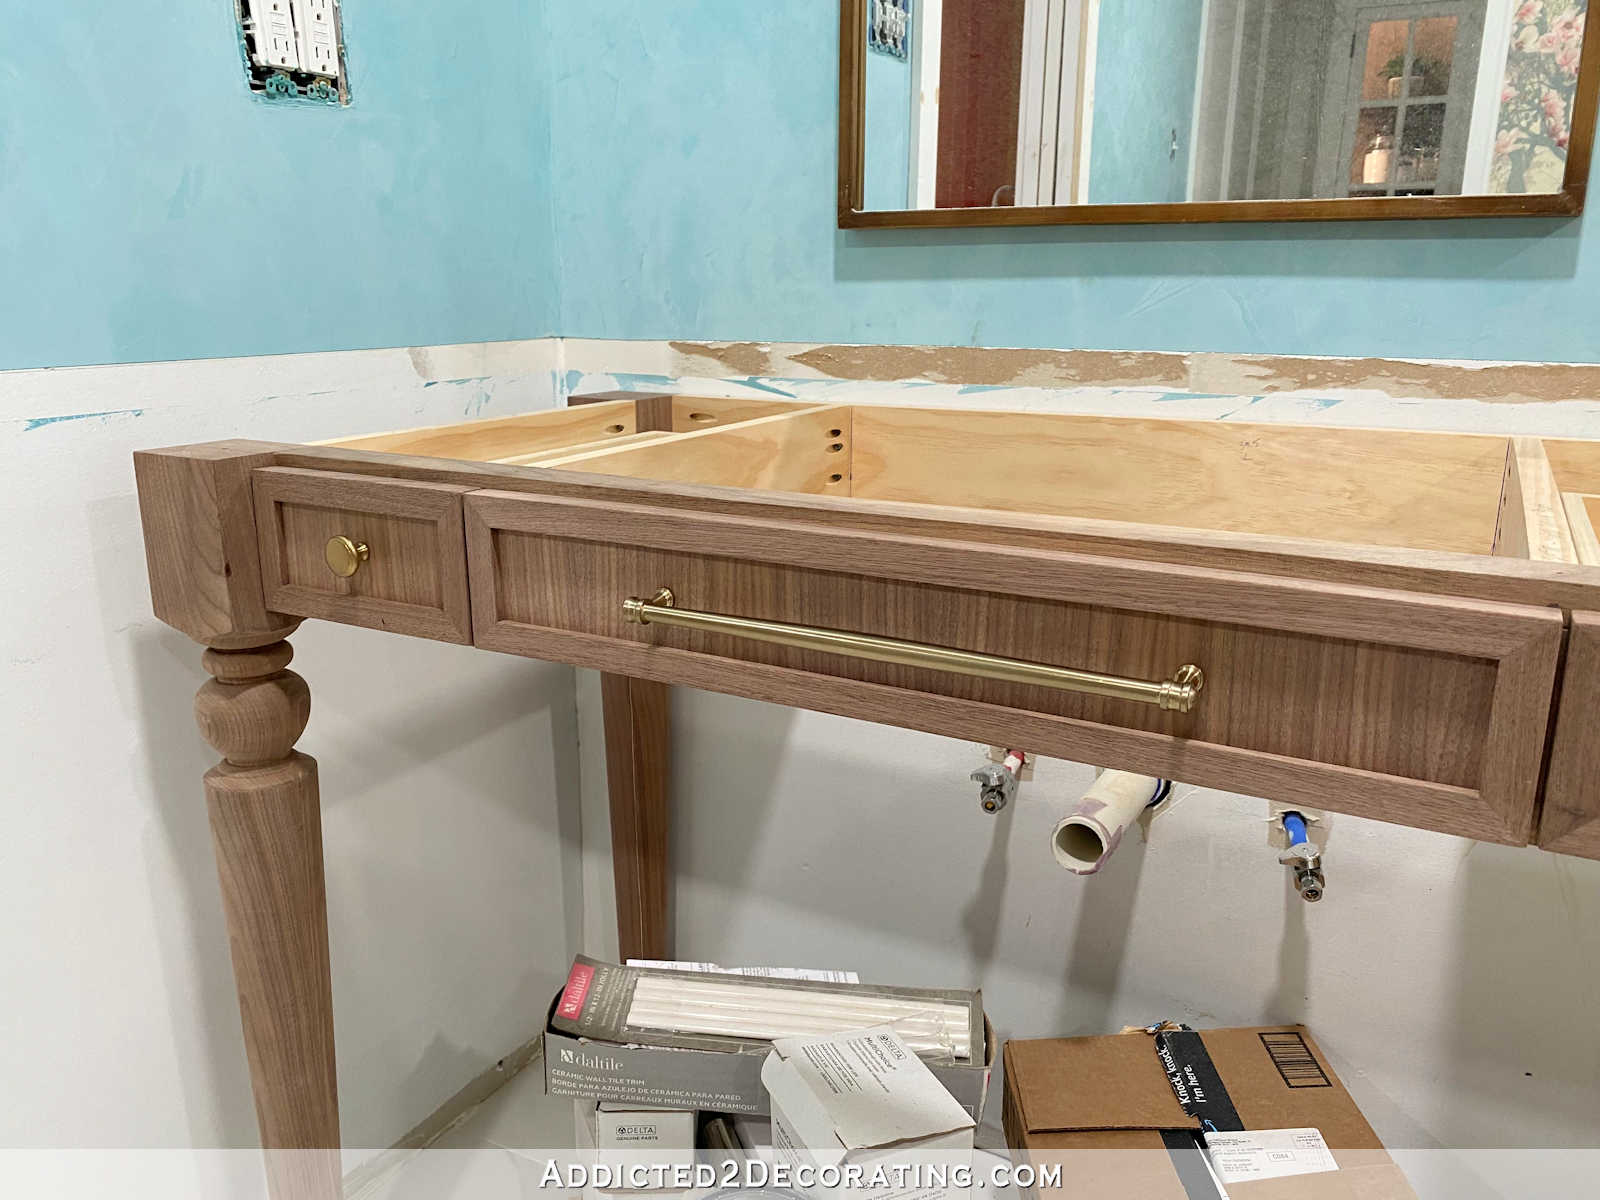 A Look At The Finished Bathroom Vanity